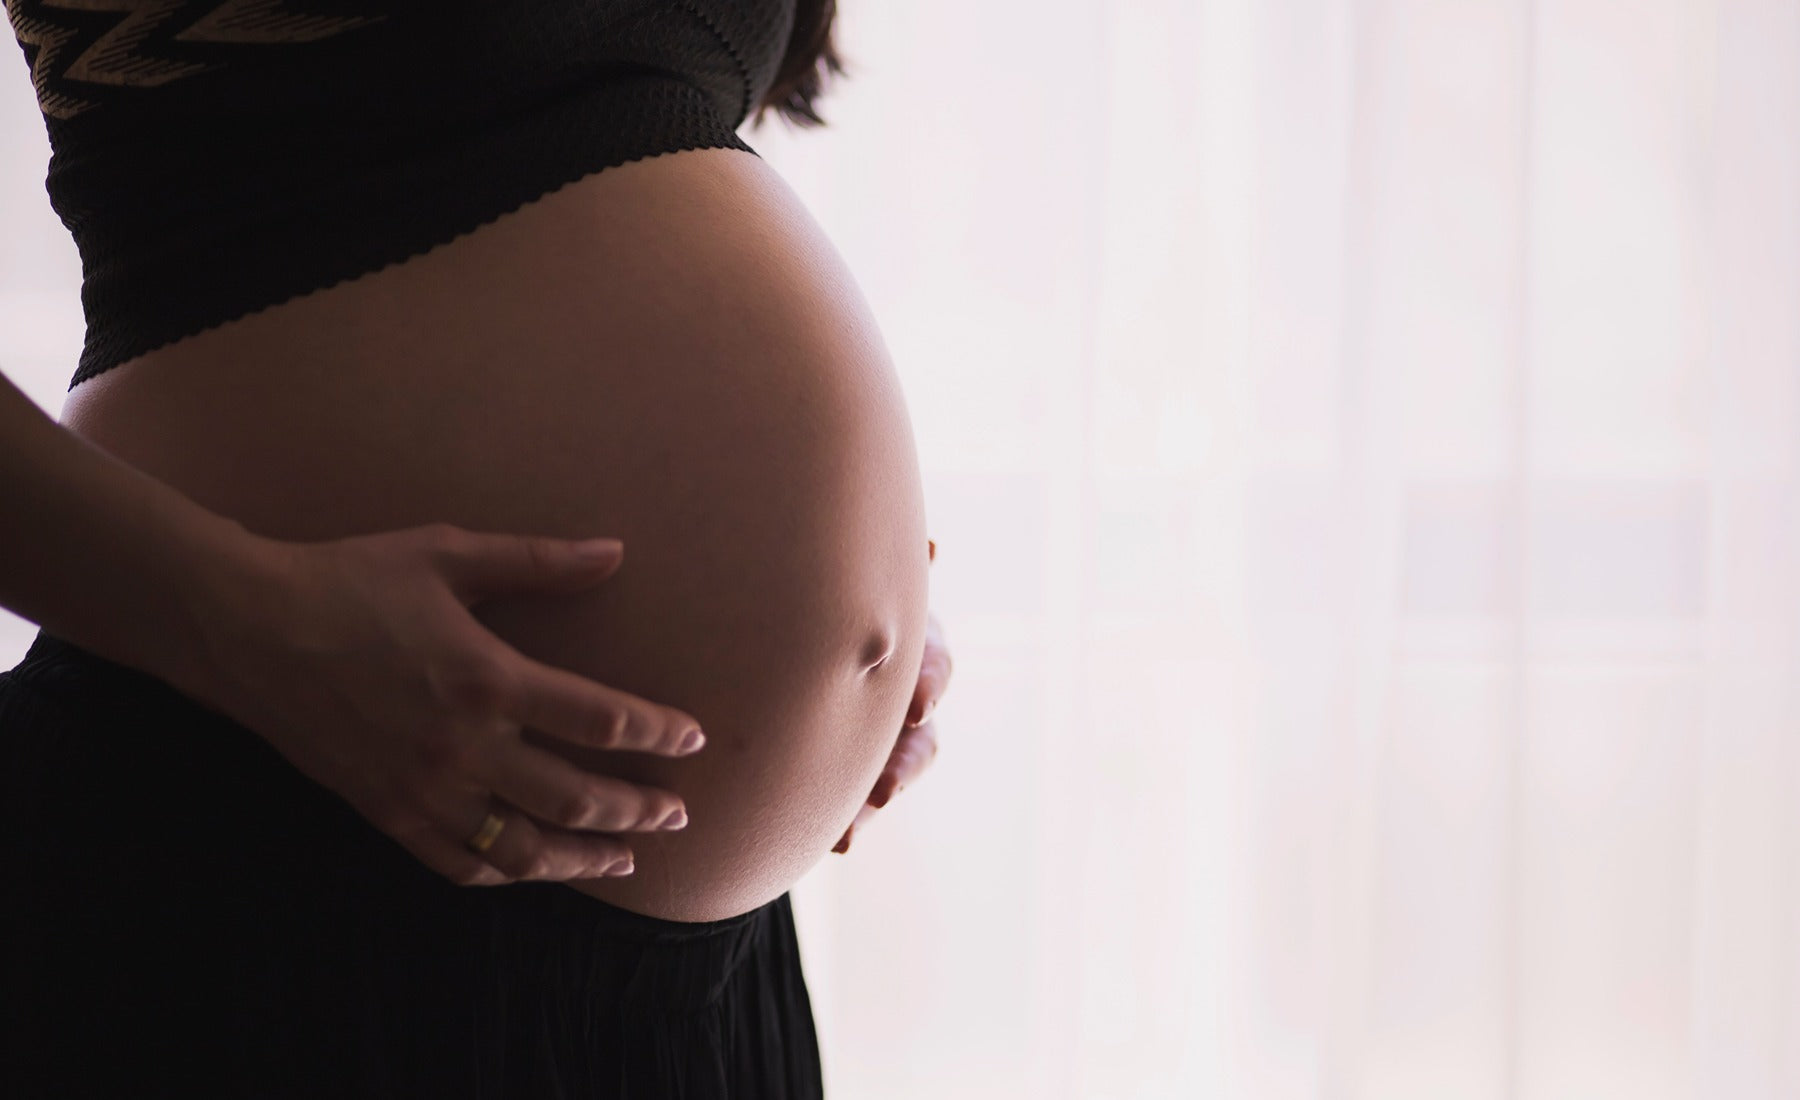 Can I Use Red Light Therapy While Pregnant?